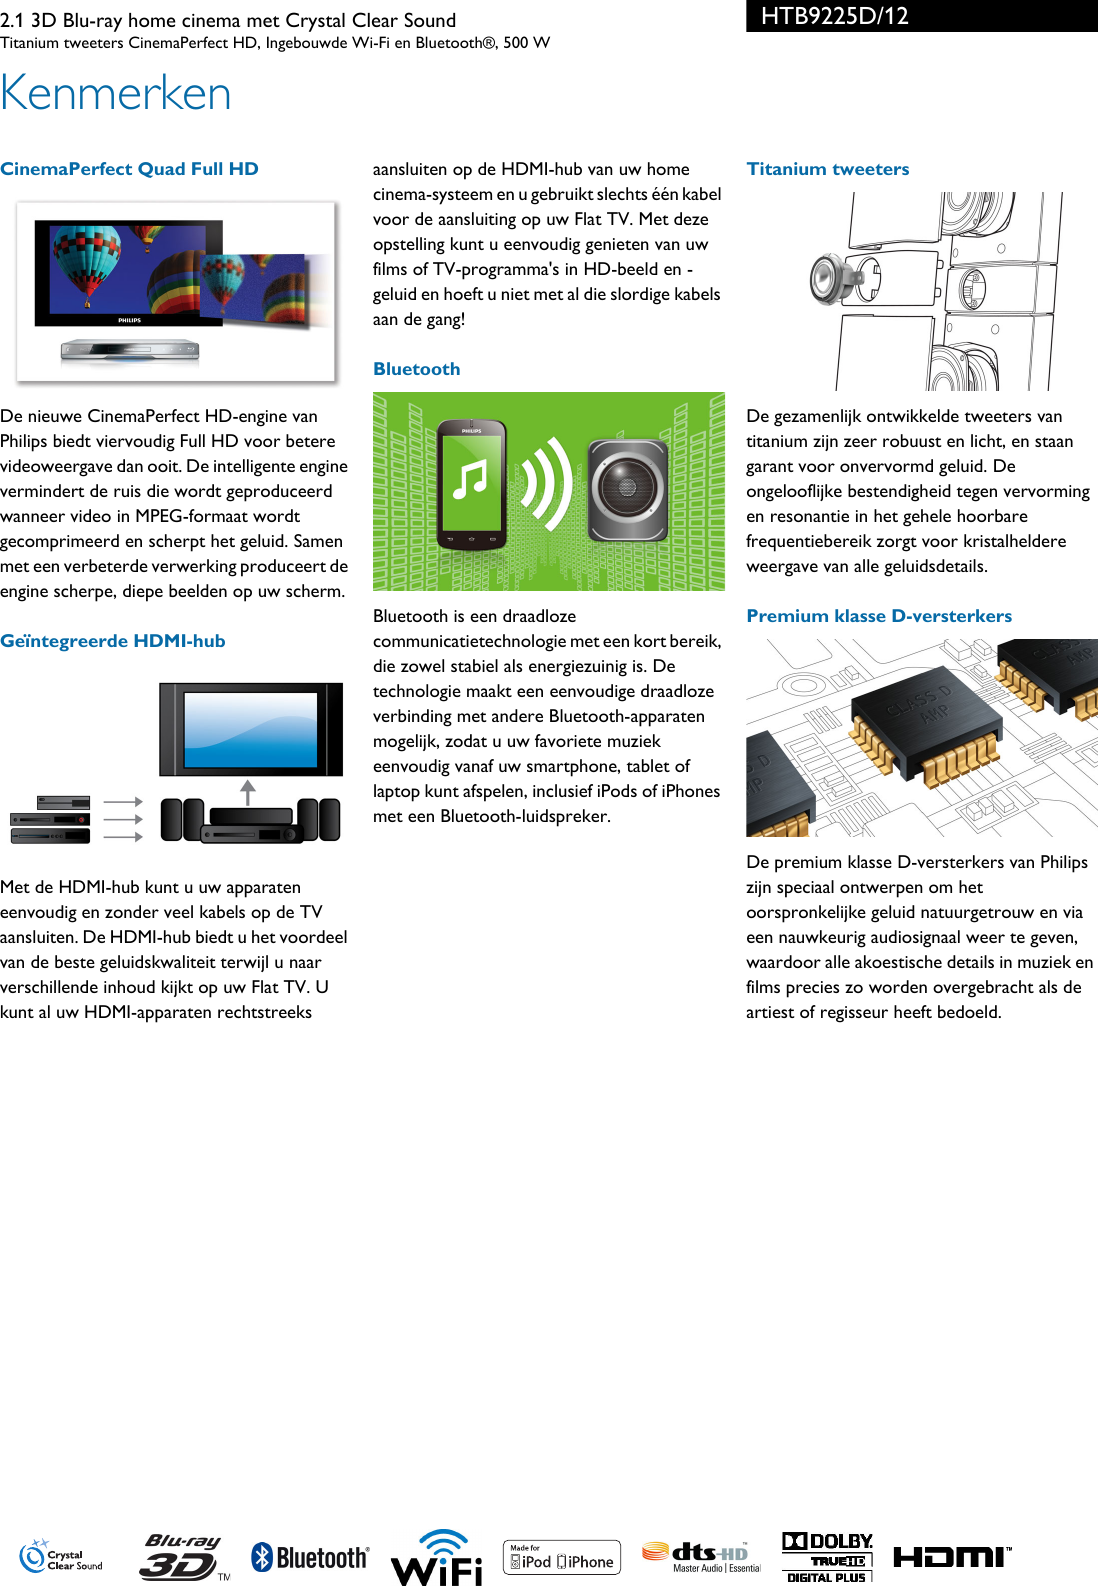 Page 2 of 3 - Philips HTB9225D/12 2.1 3D Blu-ray Home Cinema Met Crystal Clear Sound User Manual Brochure Htb9225d 12 Pss Nldbe